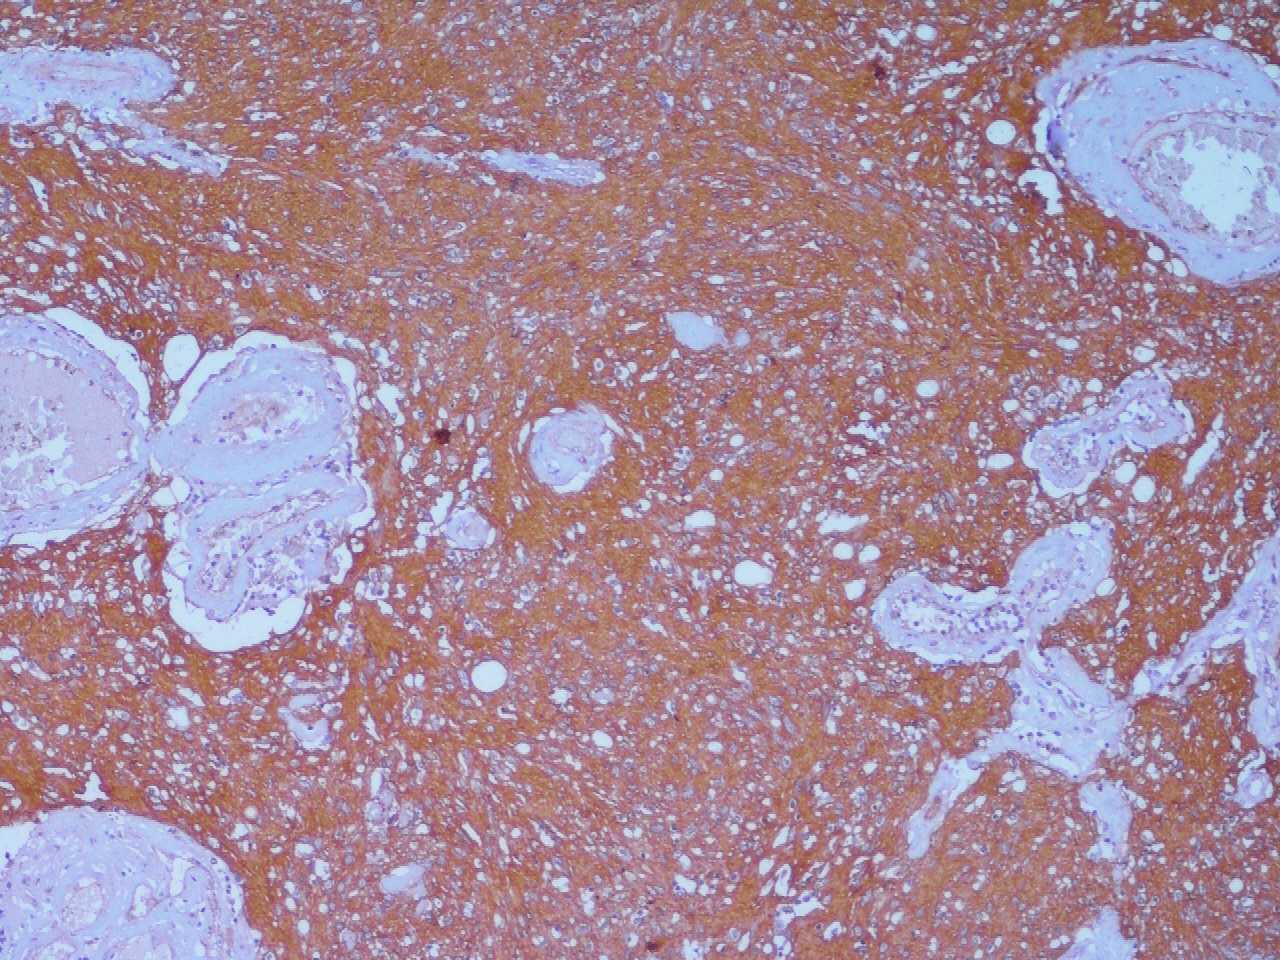 Immunohistochemistry stain, Glial Fibrillary Acid Protein, showing intense positivity for glial tissue within the inner wall 